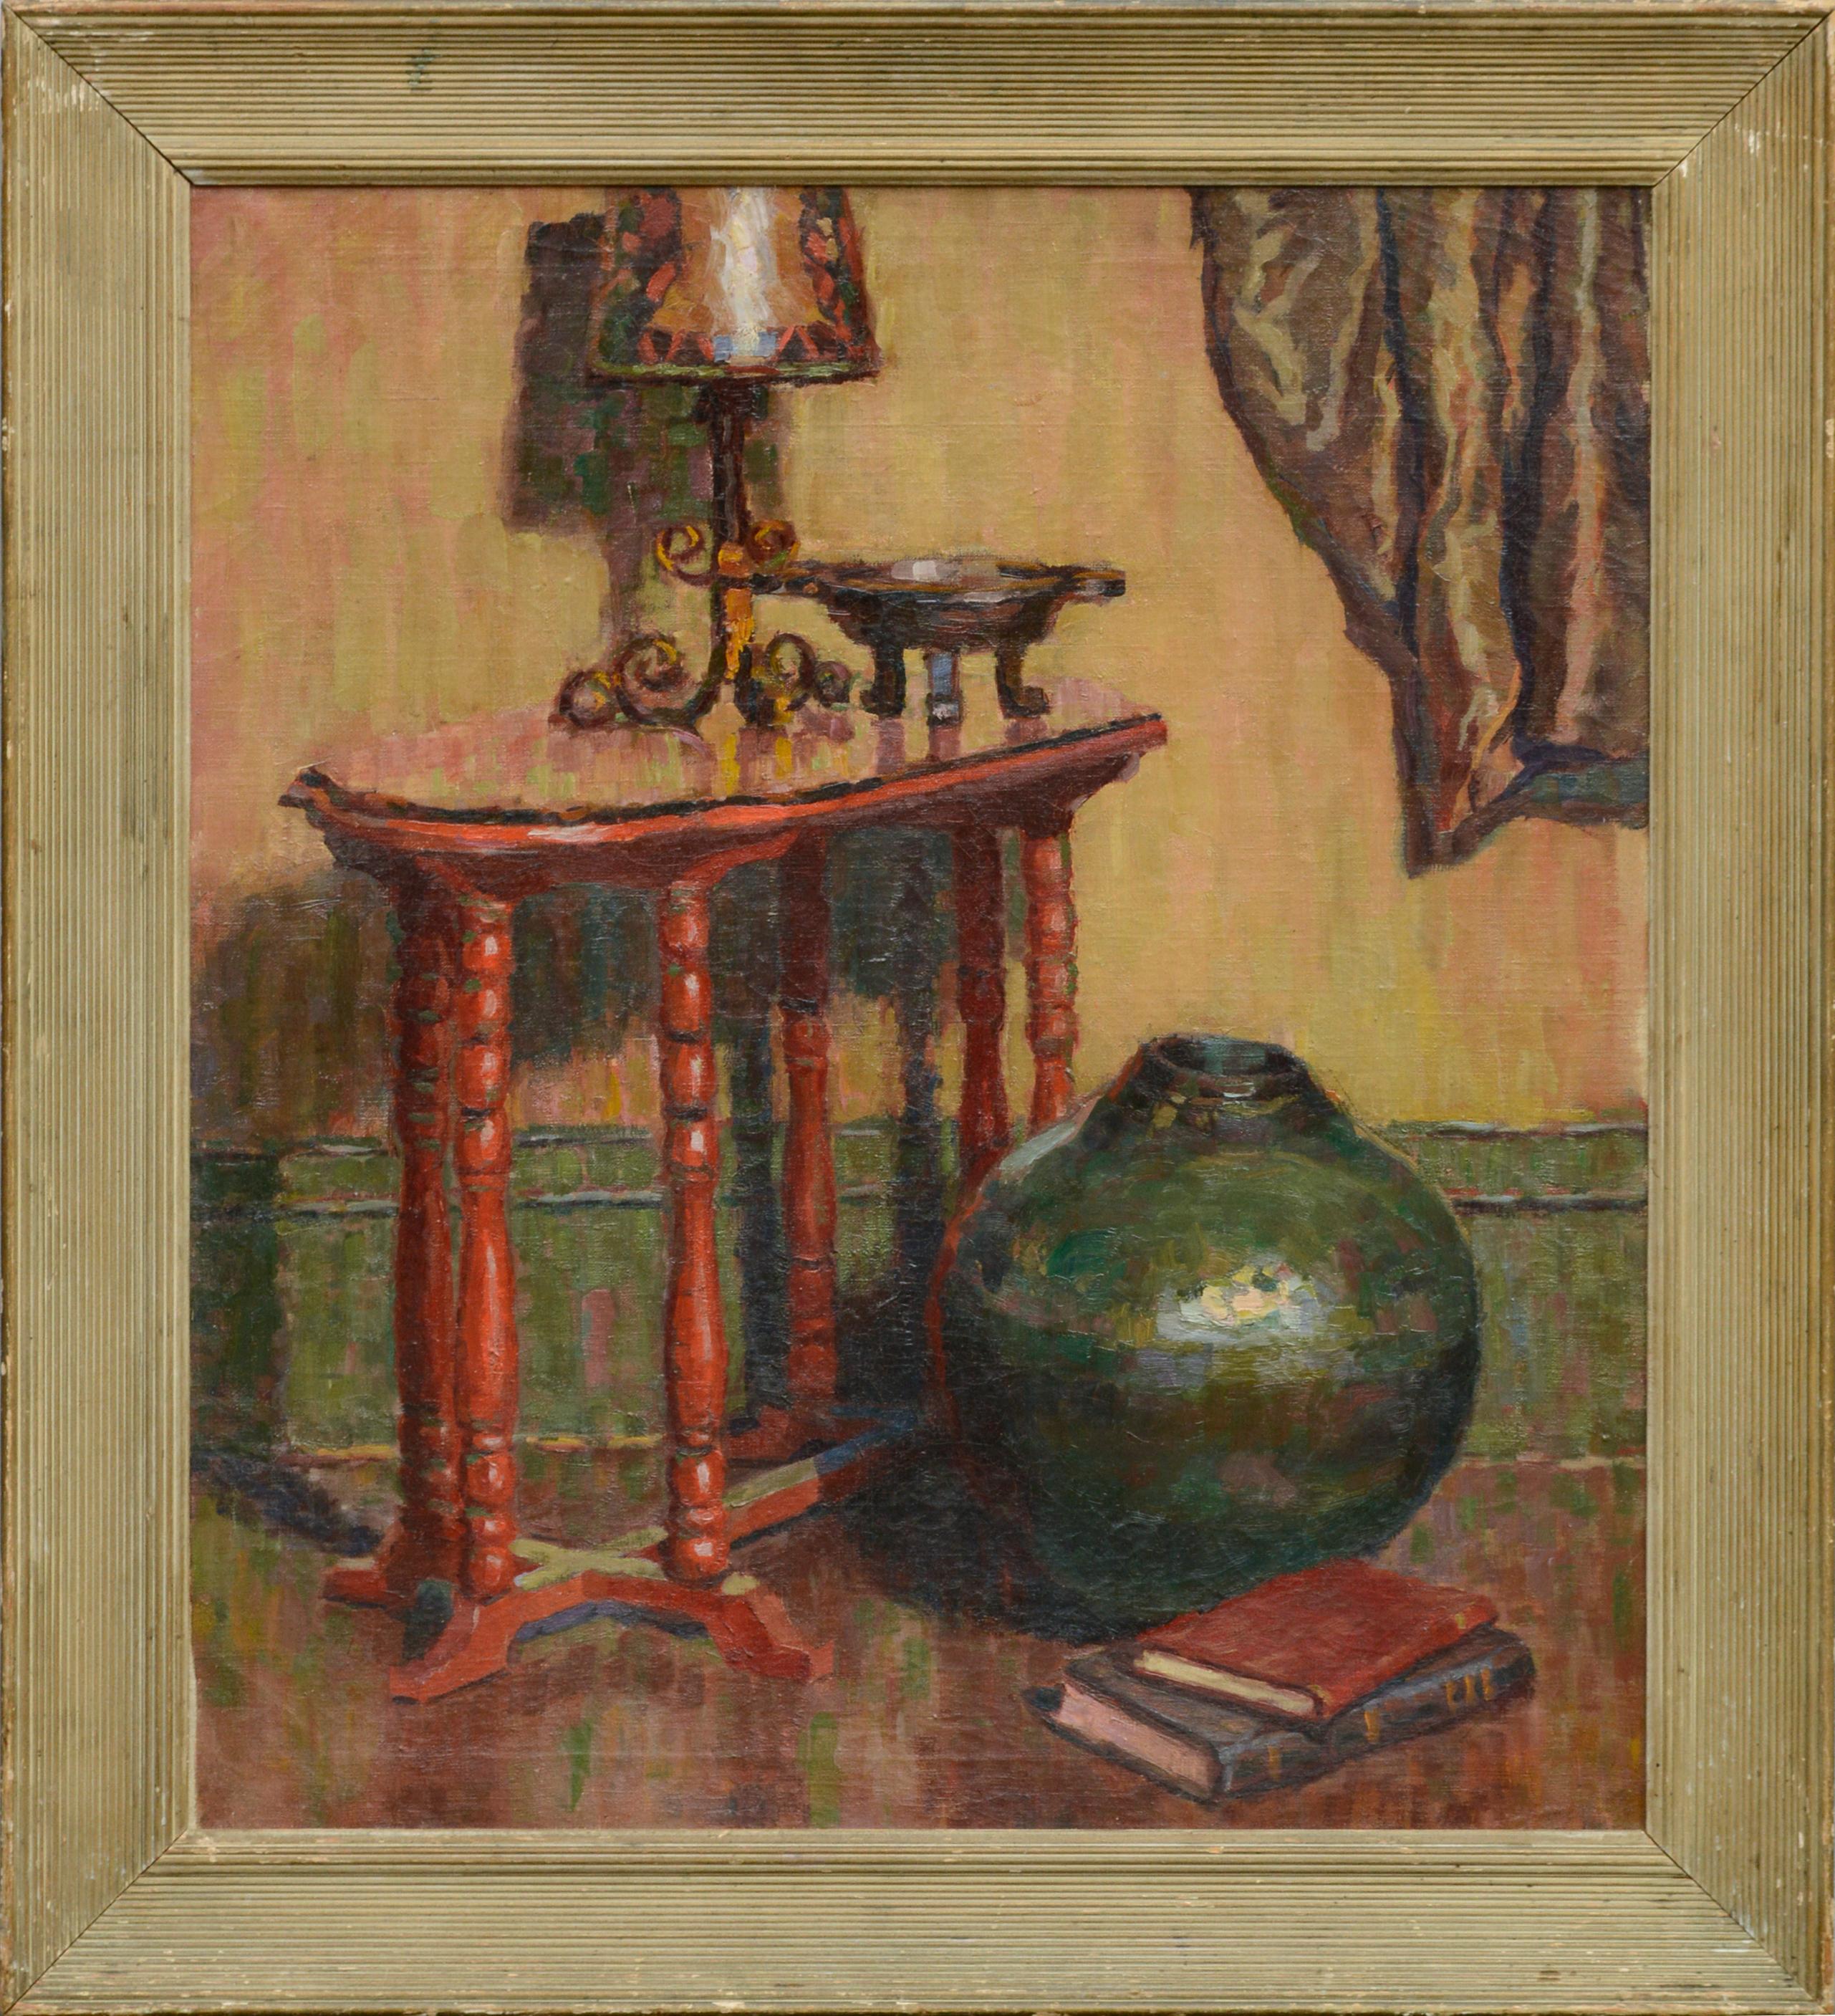 Unknown Interior Painting - Mid-Century Interior Scene with Red Table and Green Vase